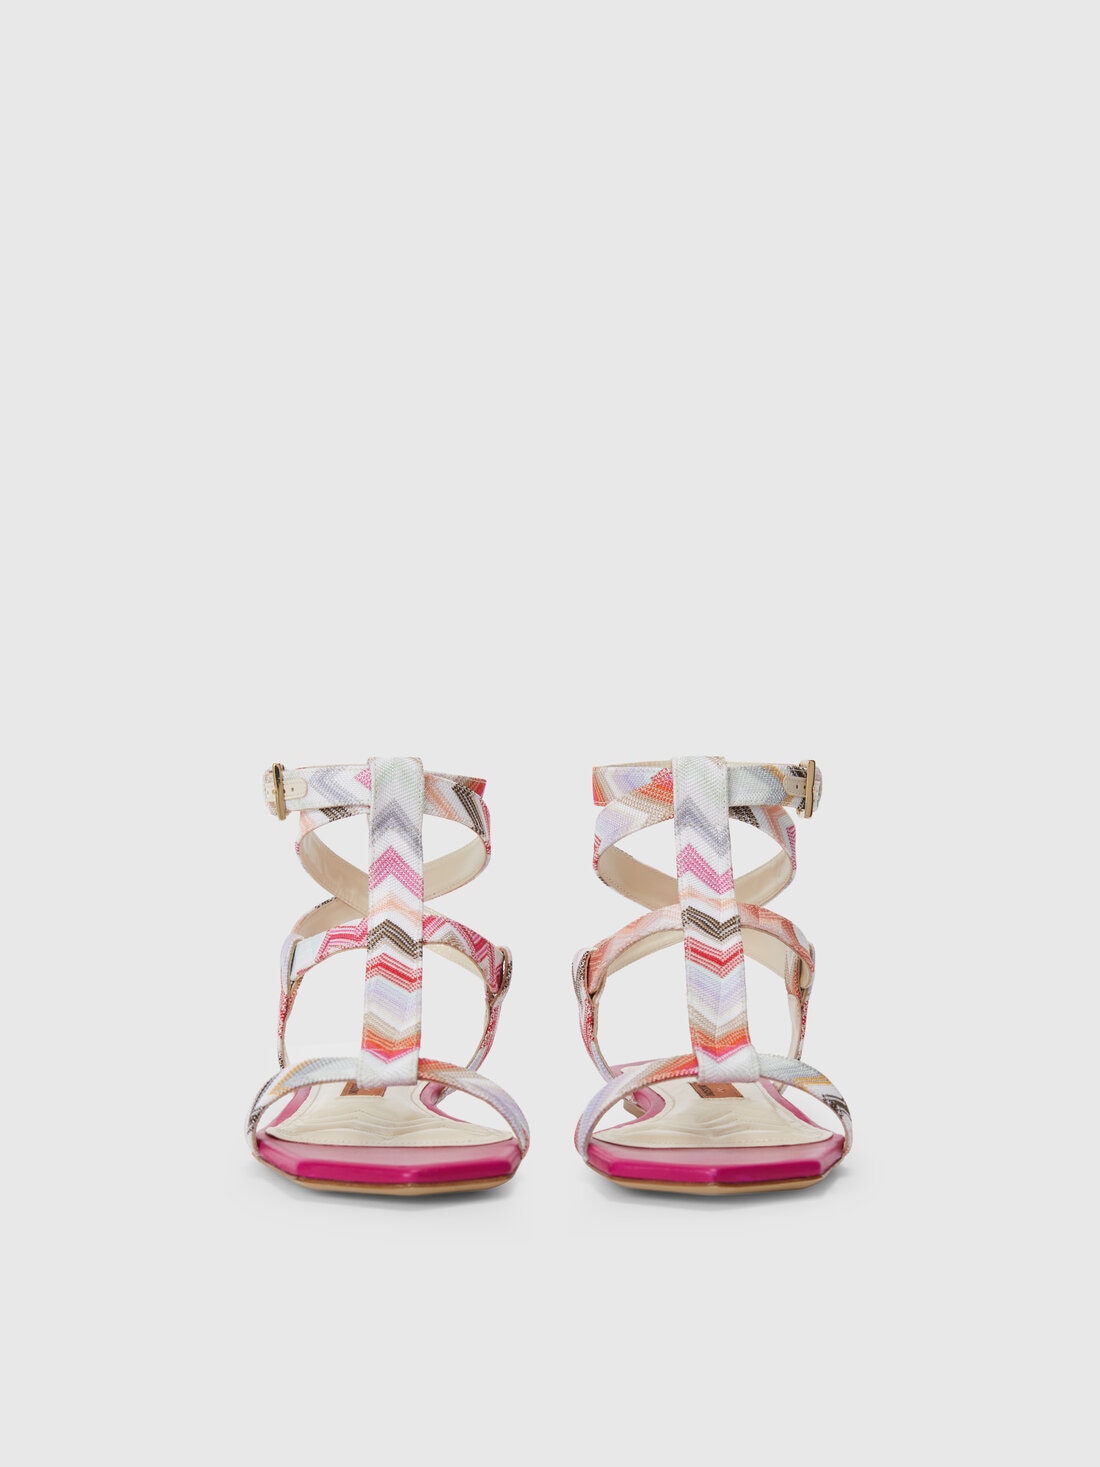 Low sandals in zigzag fabric, Pink   - LS24SY02BV00FYS30DQ - 2